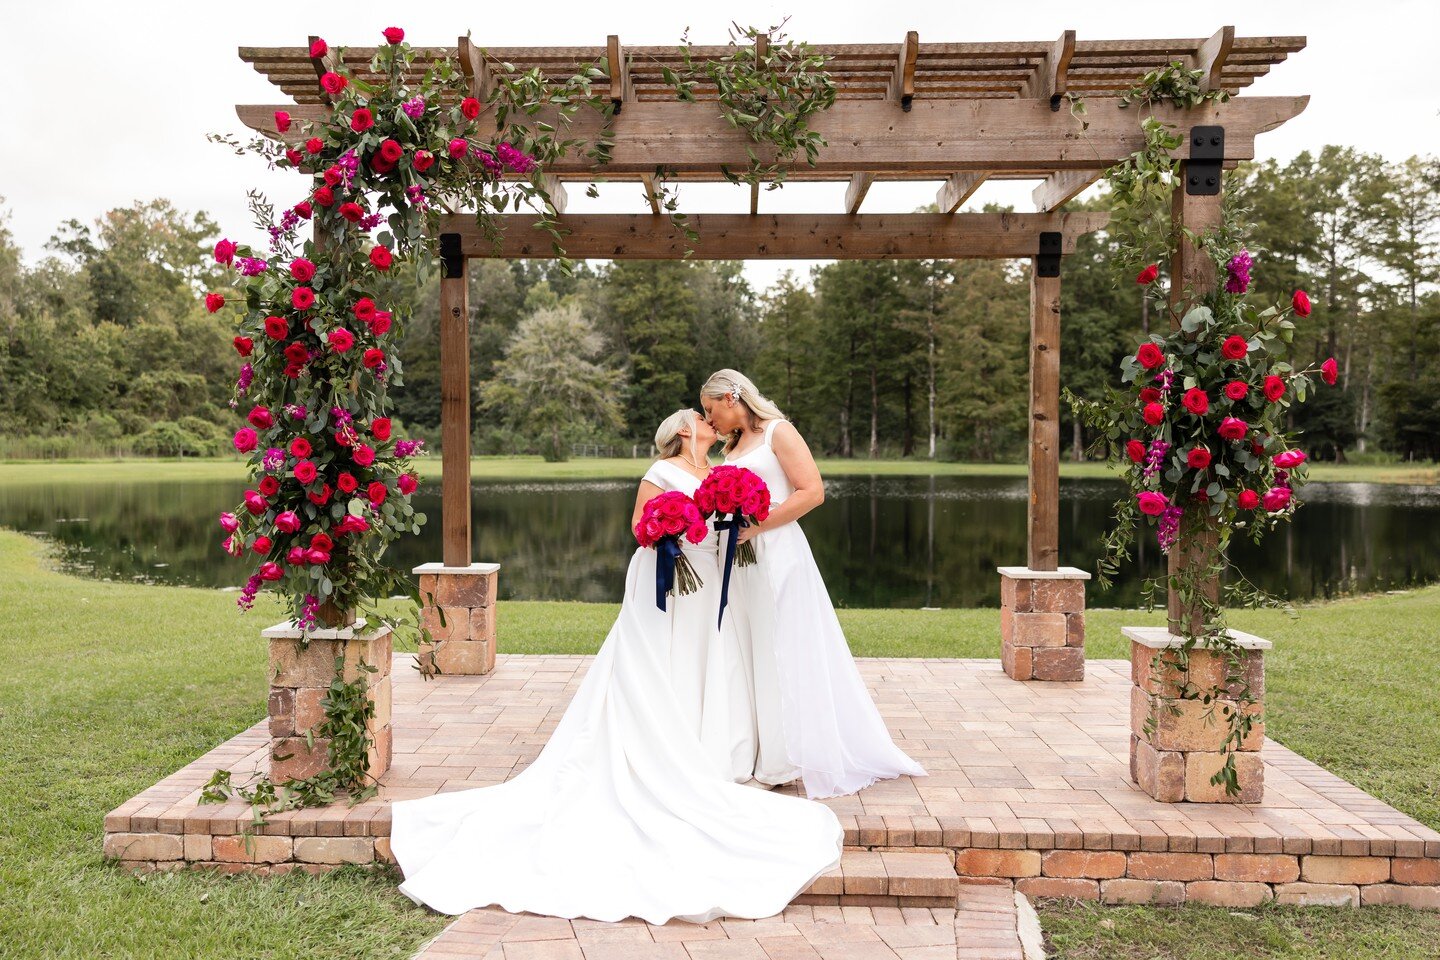 ✨ Sealed with a kiss and surrounded by nature's bliss. 💋💍💍🌸 Cheers to Lauren &amp; Marlene! ❤️

&mdash;NOW BOOKING 2024 &mdash;
www.DreamscapePhotography.com

Amazing Vendor Team:
Venue: @cypresscreekfarmhouse
Planner: @emilymaines 
Photo &amp; V